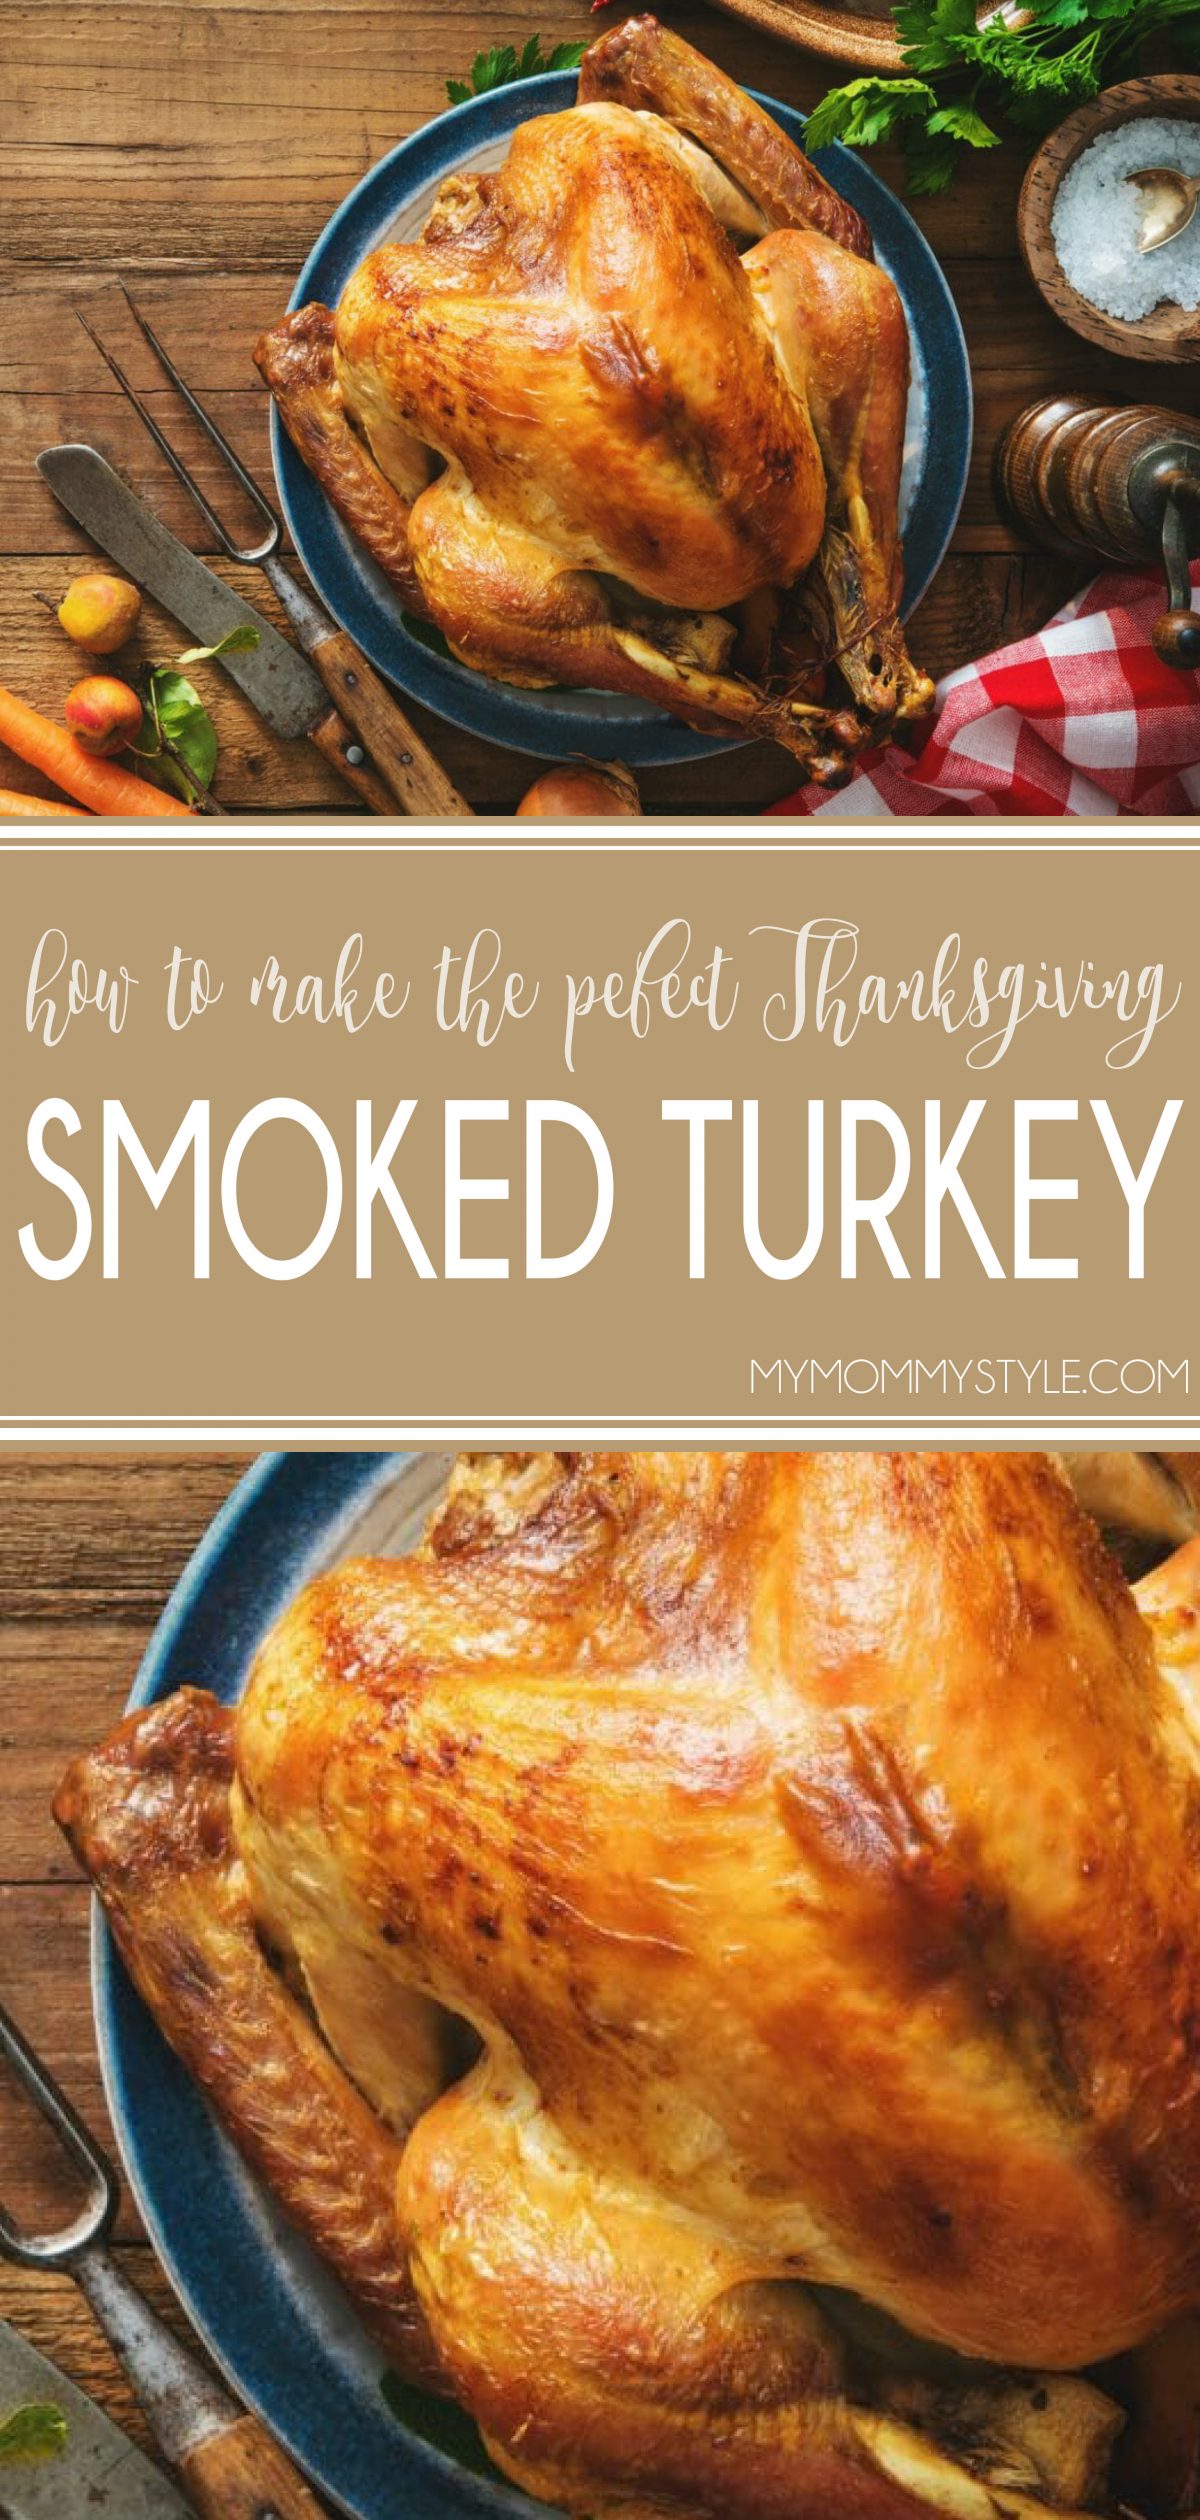 How To Smoke A Turkey This Thanksgiving - My Mommy Style